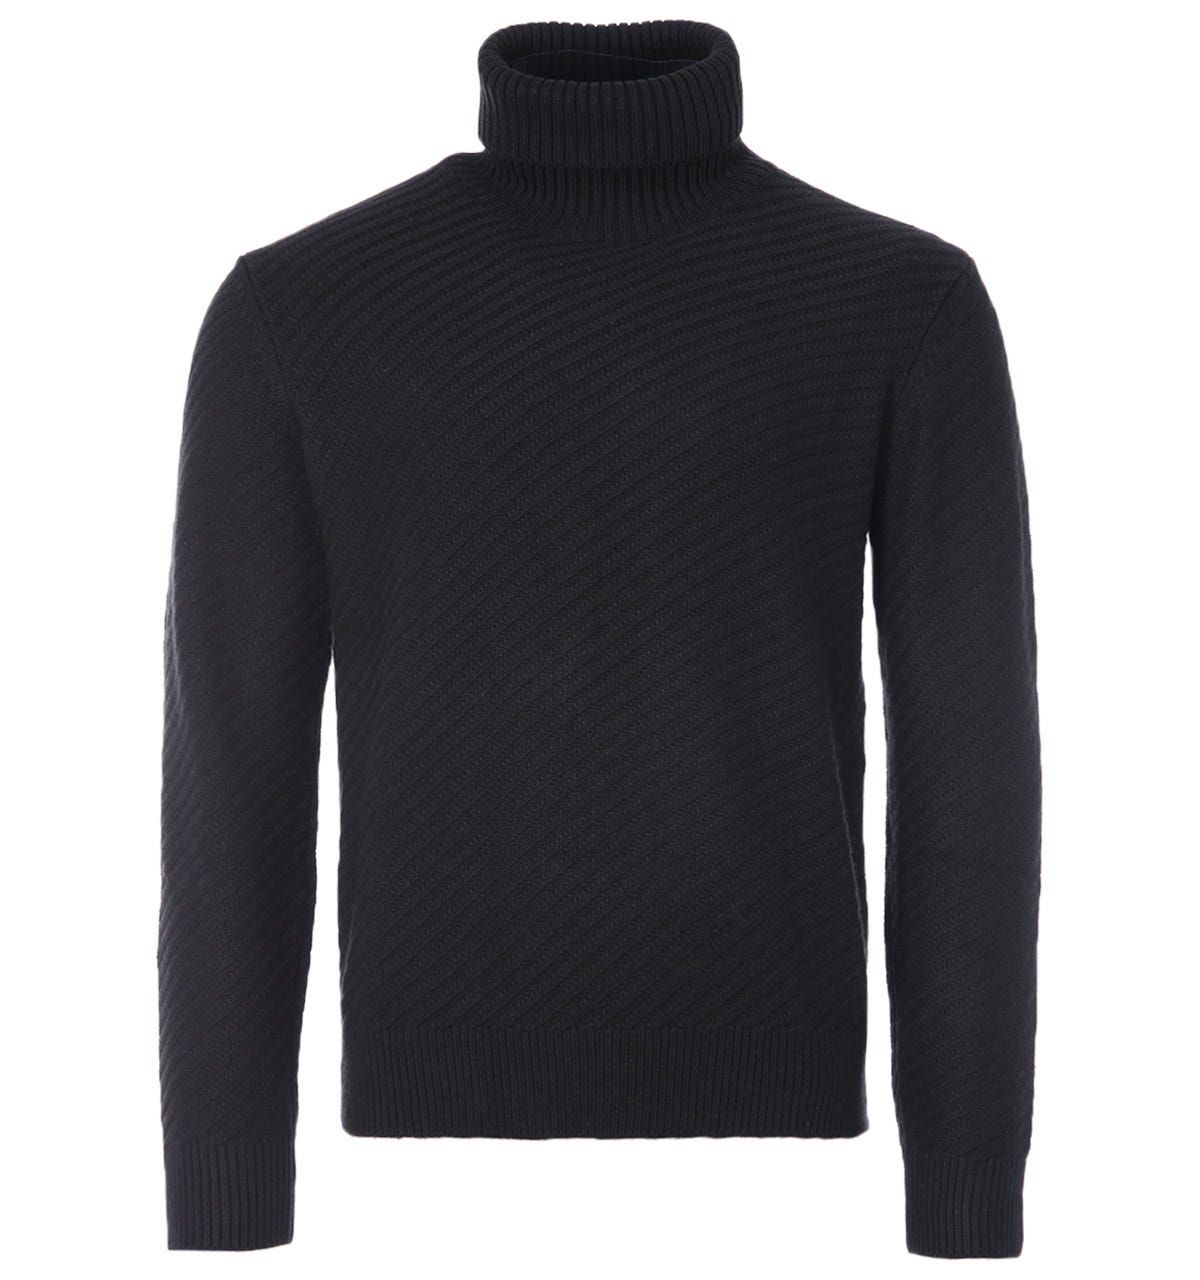 Armani Exchange present this Diagonal Knit Roll Neck Sweater, perfect for those chilly days. The distinctive diagonal knit elevates the classic sweater with understated style. Knitted from a blend of wool and synthetics providing a soft and comfortable feel. Featuring a ribbed roll neck, long sleeves and ribbed trims. Finished with subtle Armani Exchange branding. Regular Fit, Viscose, Acrylic, Nylon & Wool Knit, Ribbed Roll Neck, Long Sleeves, Ribbed Cuffs & Hem, Armani Exchange Branding. Style & Fit:Regular Fit, Fits True to Size. Composition & Care:50% Viscose, 30% Acrylic, 15% Polyamide (Nylon), 5% Wool, Machine Wash.